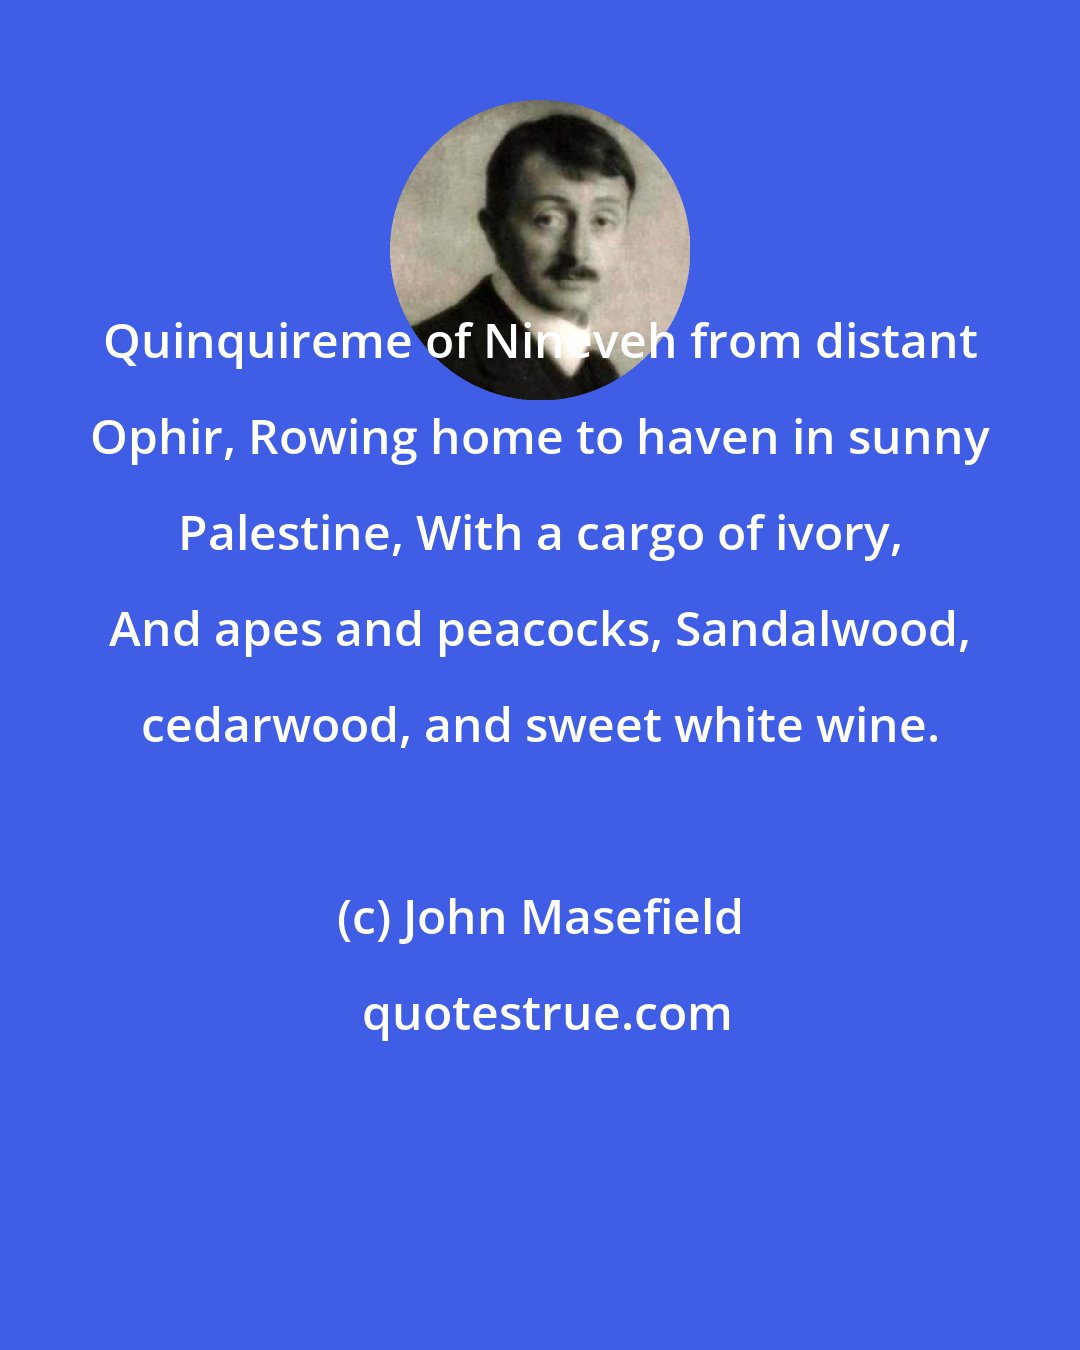 John Masefield: Quinquireme of Nineveh from distant Ophir, Rowing home to haven in sunny Palestine, With a cargo of ivory, And apes and peacocks, Sandalwood, cedarwood, and sweet white wine.